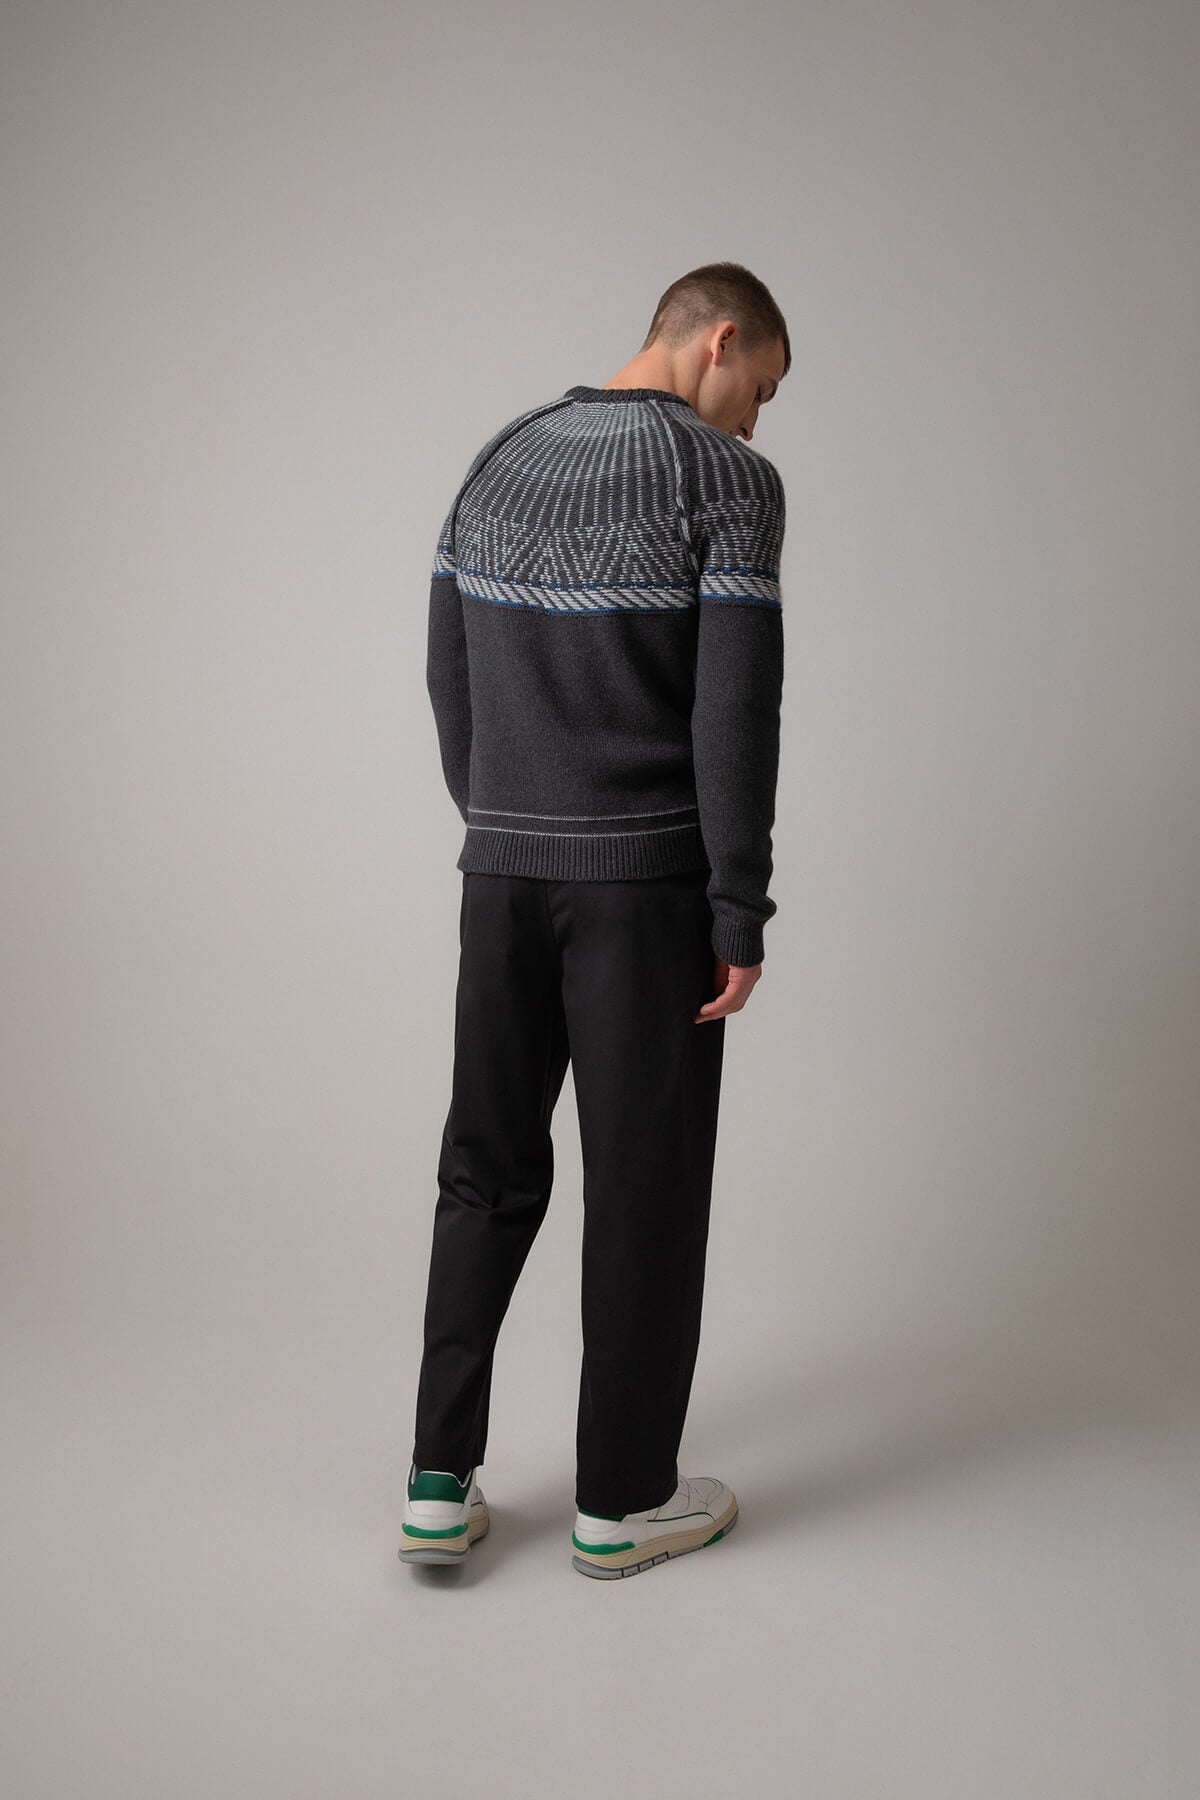 Johnstons of Elgin’s Men's Fairisle Yoke Cashmere Jumper in Charcoal grey on model wearing black trousers on a grey background KAB05108Q23714